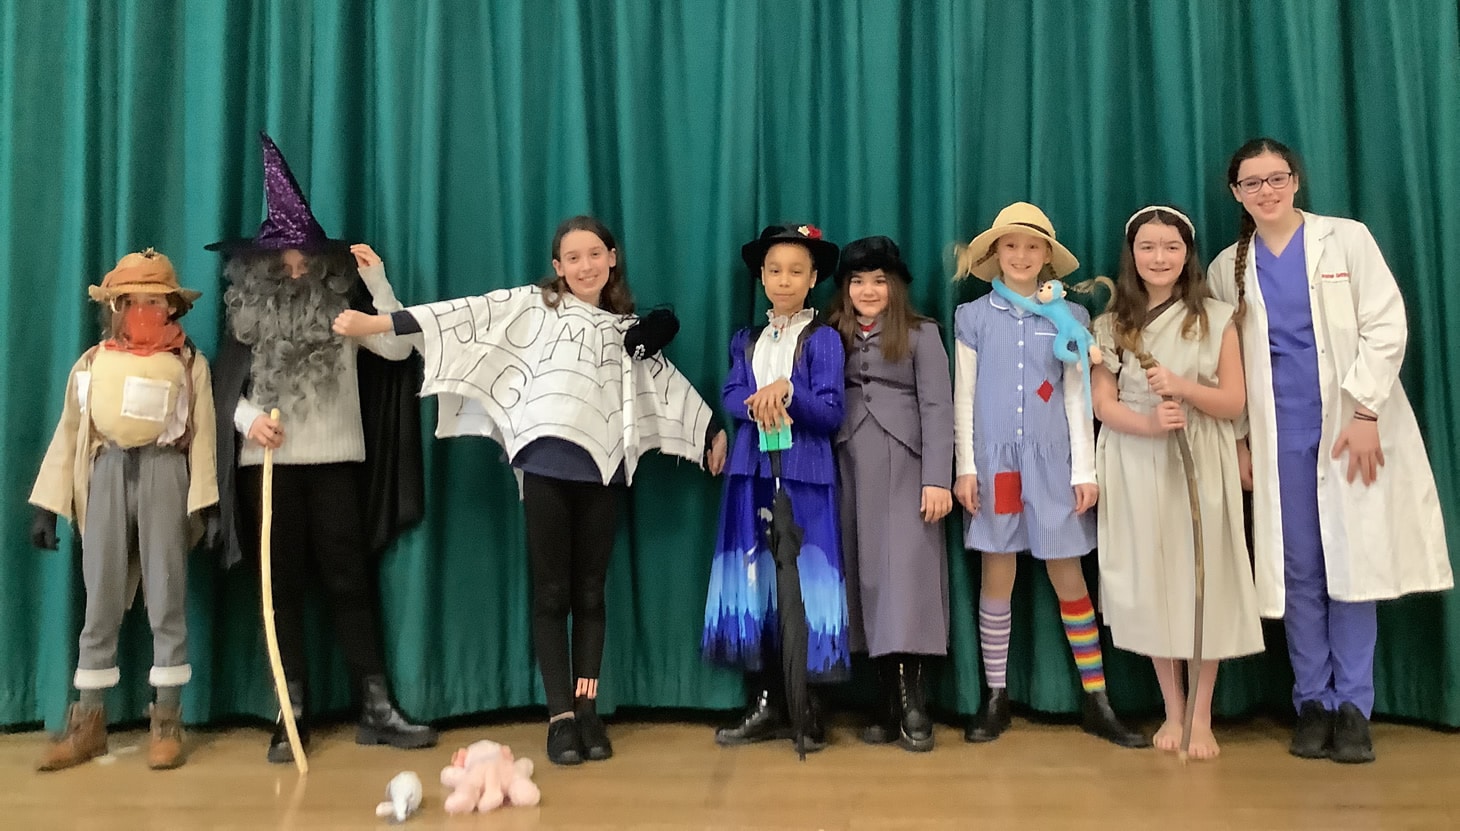 World Book Day costumes 